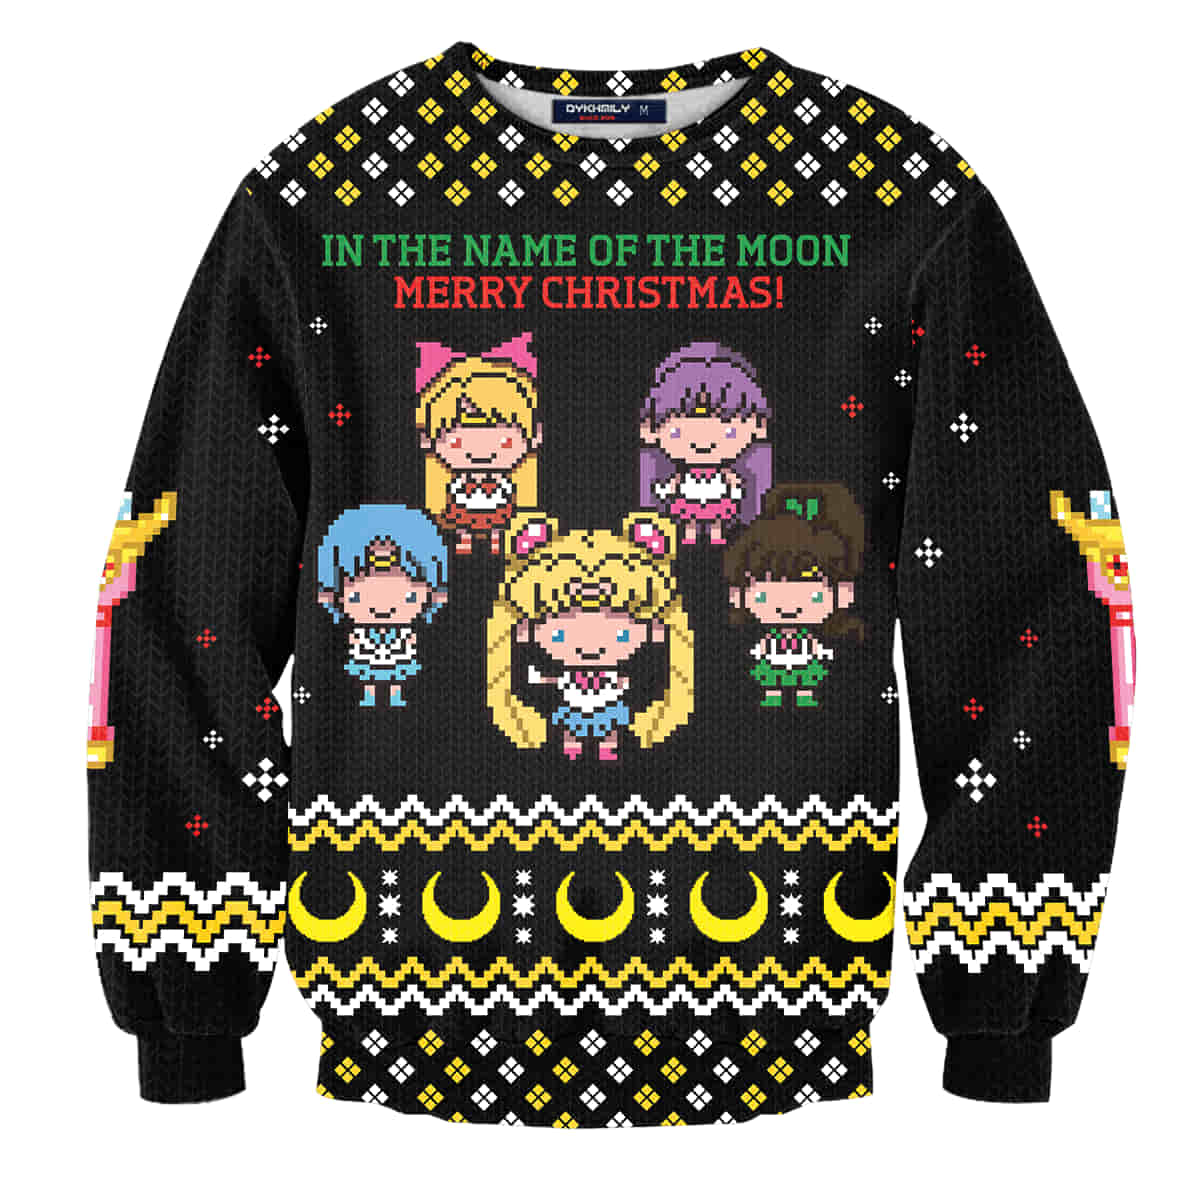 In The Name Of The Moon Wool Knitted Sweater, Sailor Moon 3d Sweater